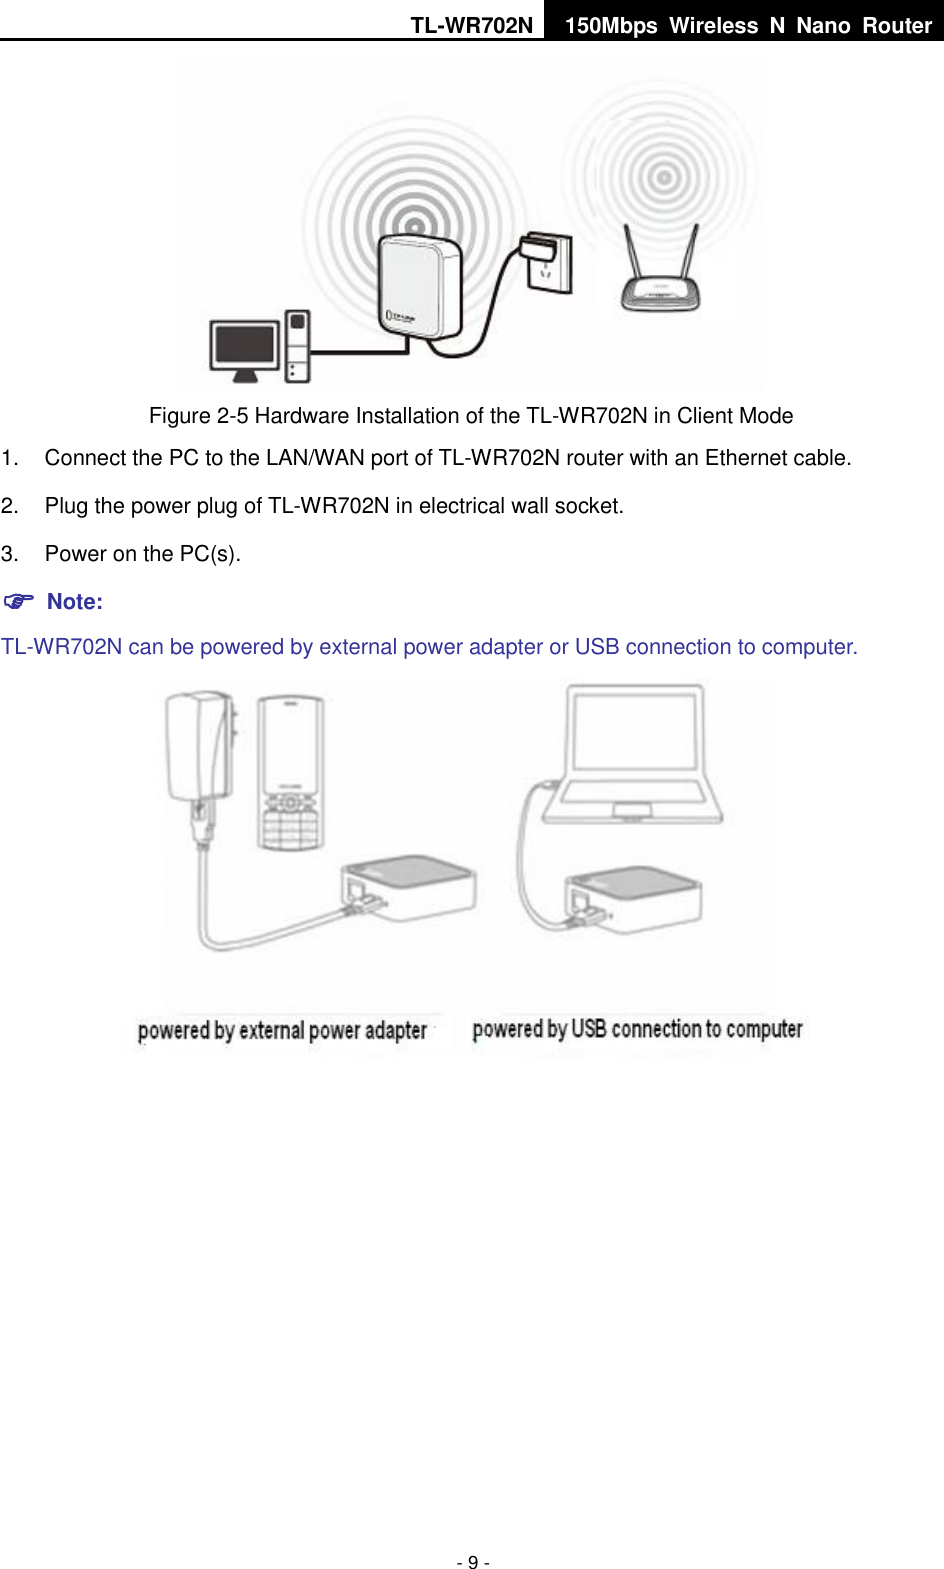 TL-WR702N 150Mbps  Wireless  N  Nano  Router  - 9 -  Figure 2-5 Hardware Installation of the TL-WR702N in Client Mode 1.  Connect the PC to the LAN/WAN port of TL-WR702N router with an Ethernet cable. 2.  Plug the power plug of TL-WR702N in electrical wall socket. 3.  Power on the PC(s).  Note:   TL-WR702N can be powered by external power adapter or USB connection to computer.  